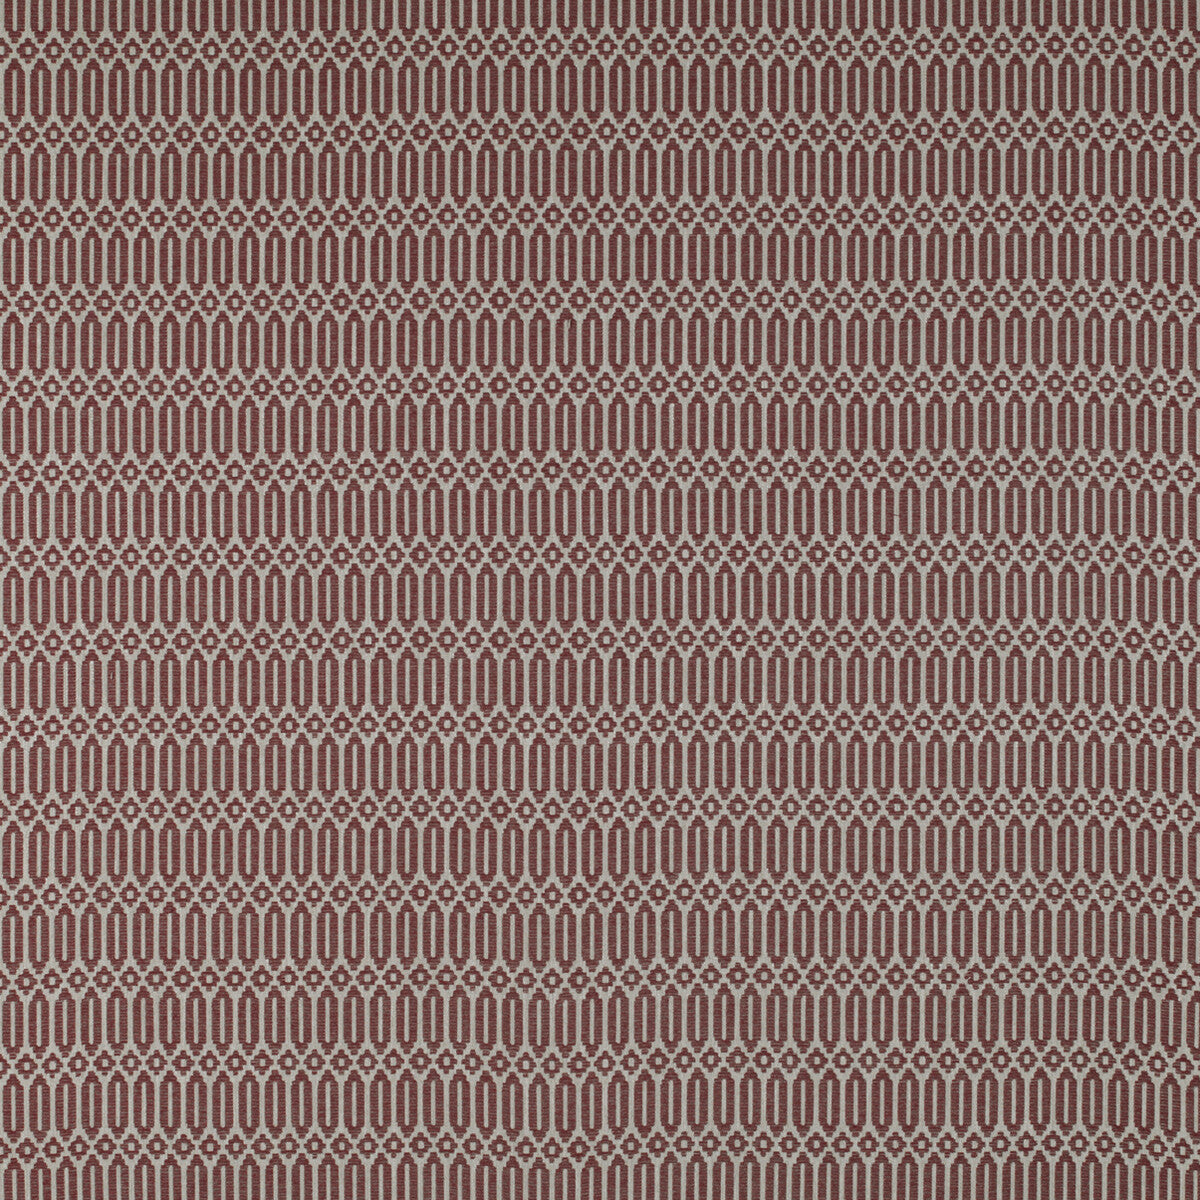 Varese fabric in burdeos color - pattern GDT5321.005.0 - by Gaston y Daniela in the Tierras collection